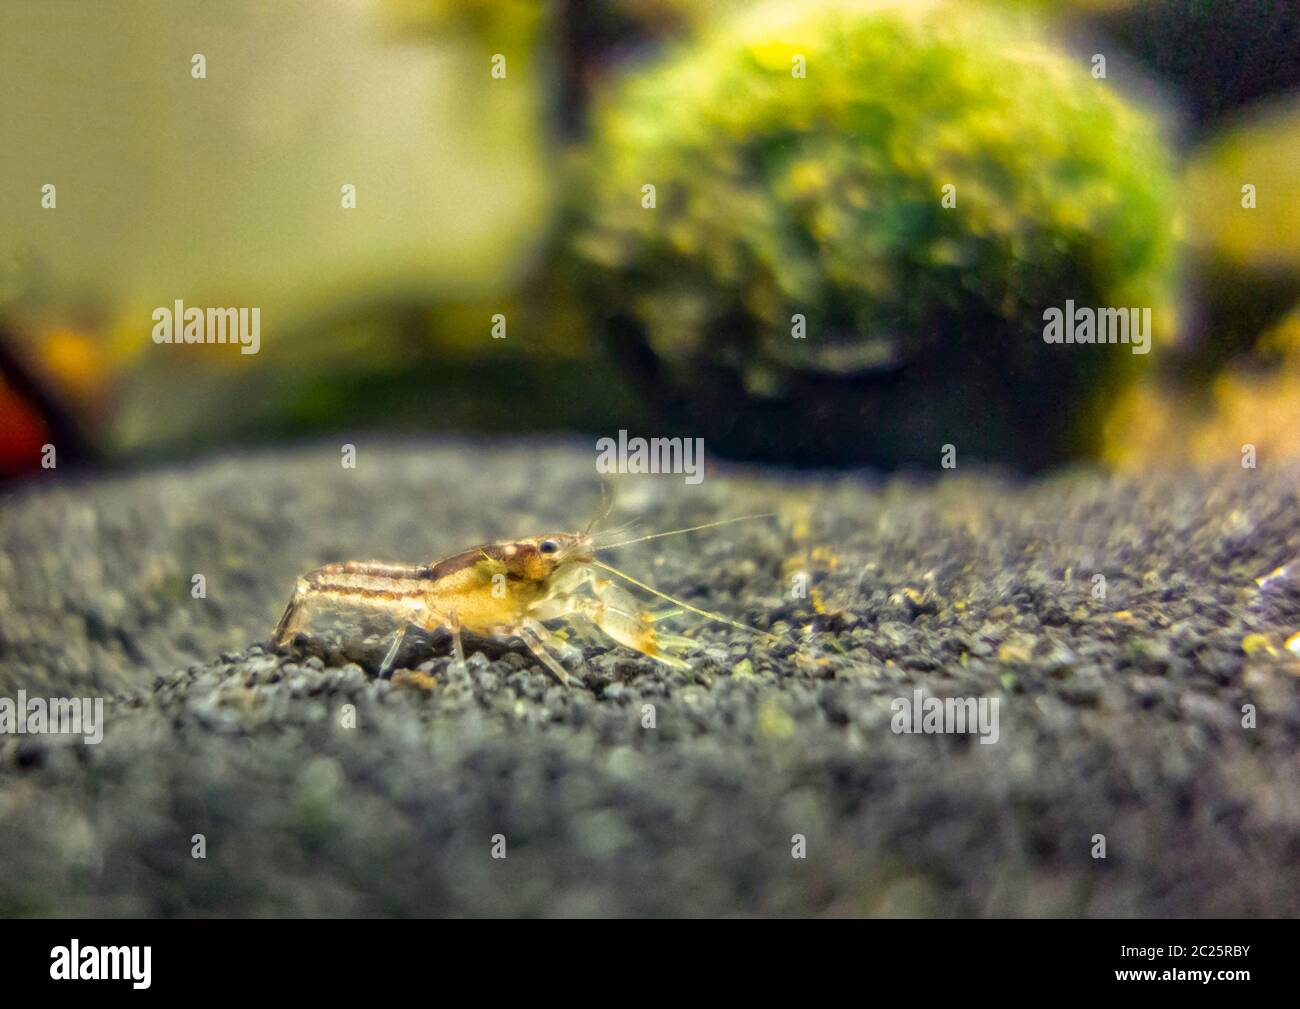 macro shot of a small freshwater crayfish in aquatic ambiance Stock Photo